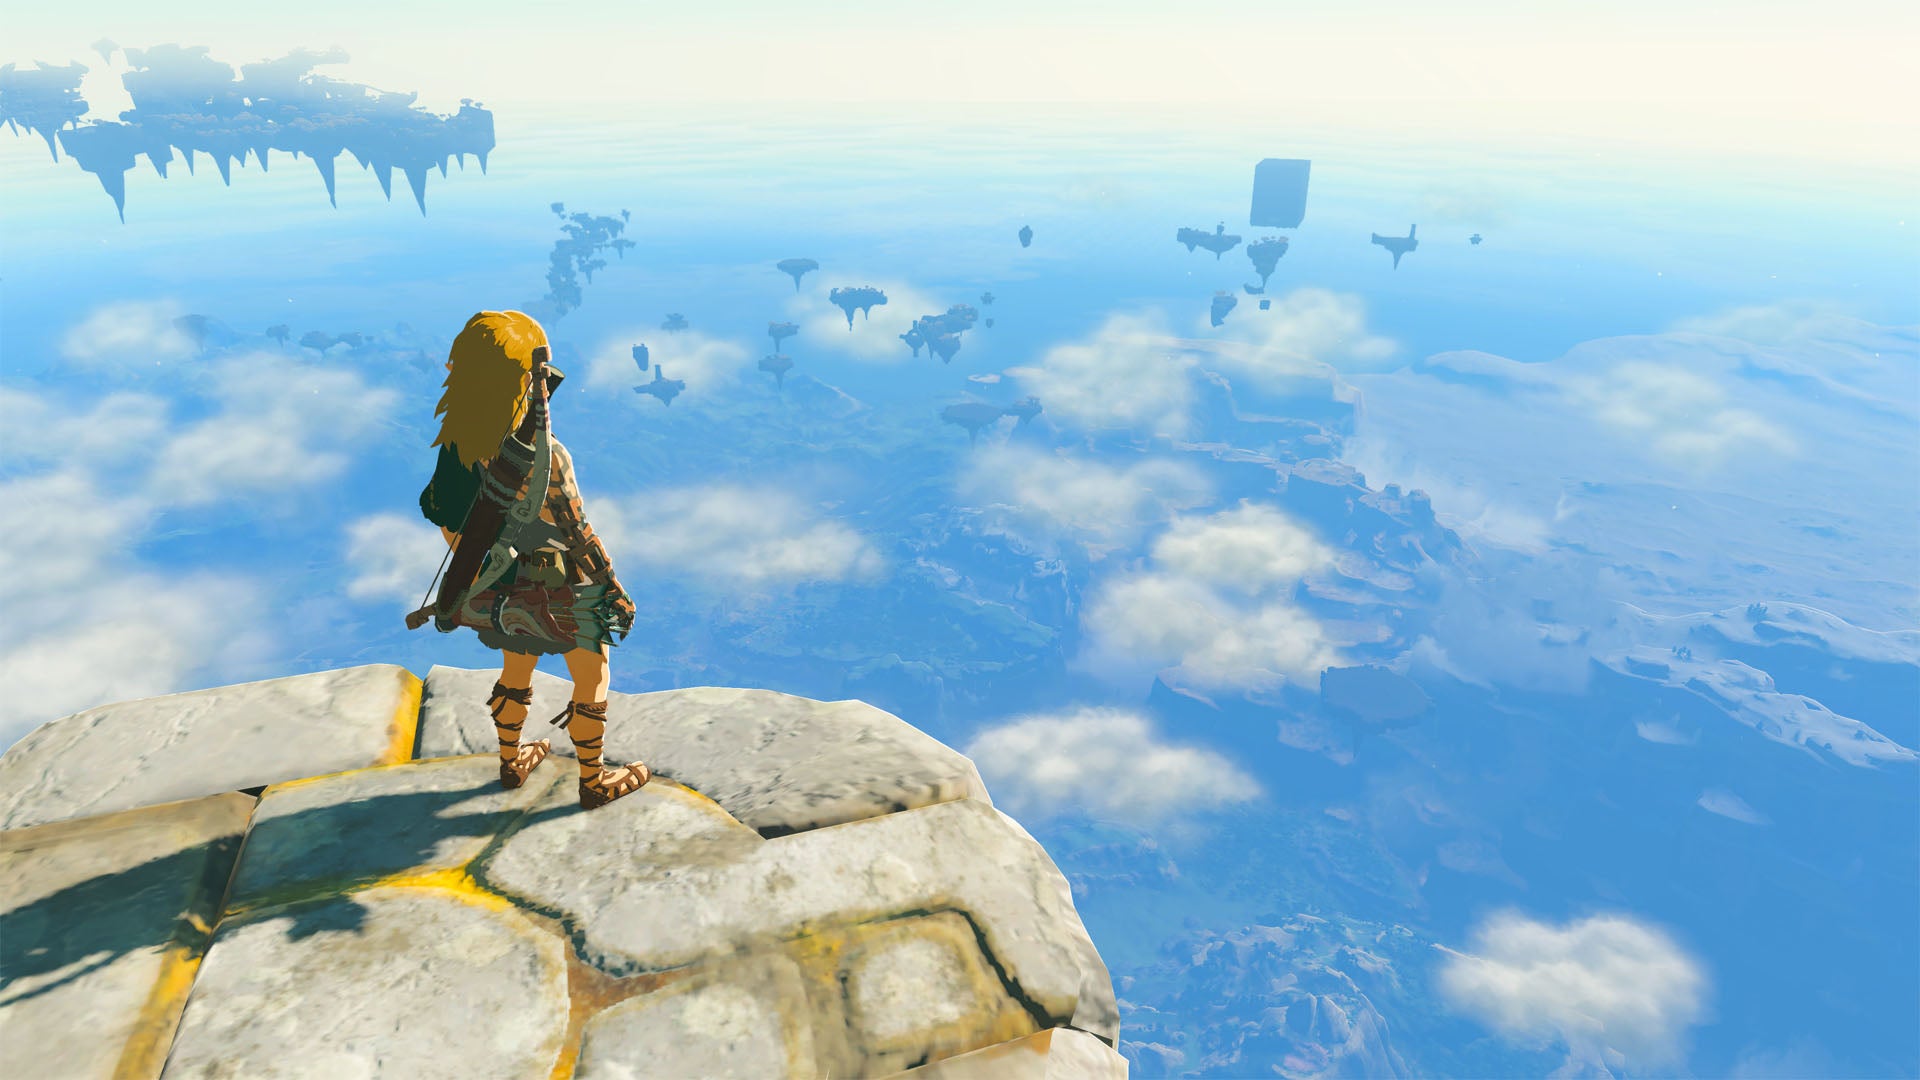 Image for Zelda: Tears of the Kingdom producer says fans can expect gameplay that brings “changes to the game world”